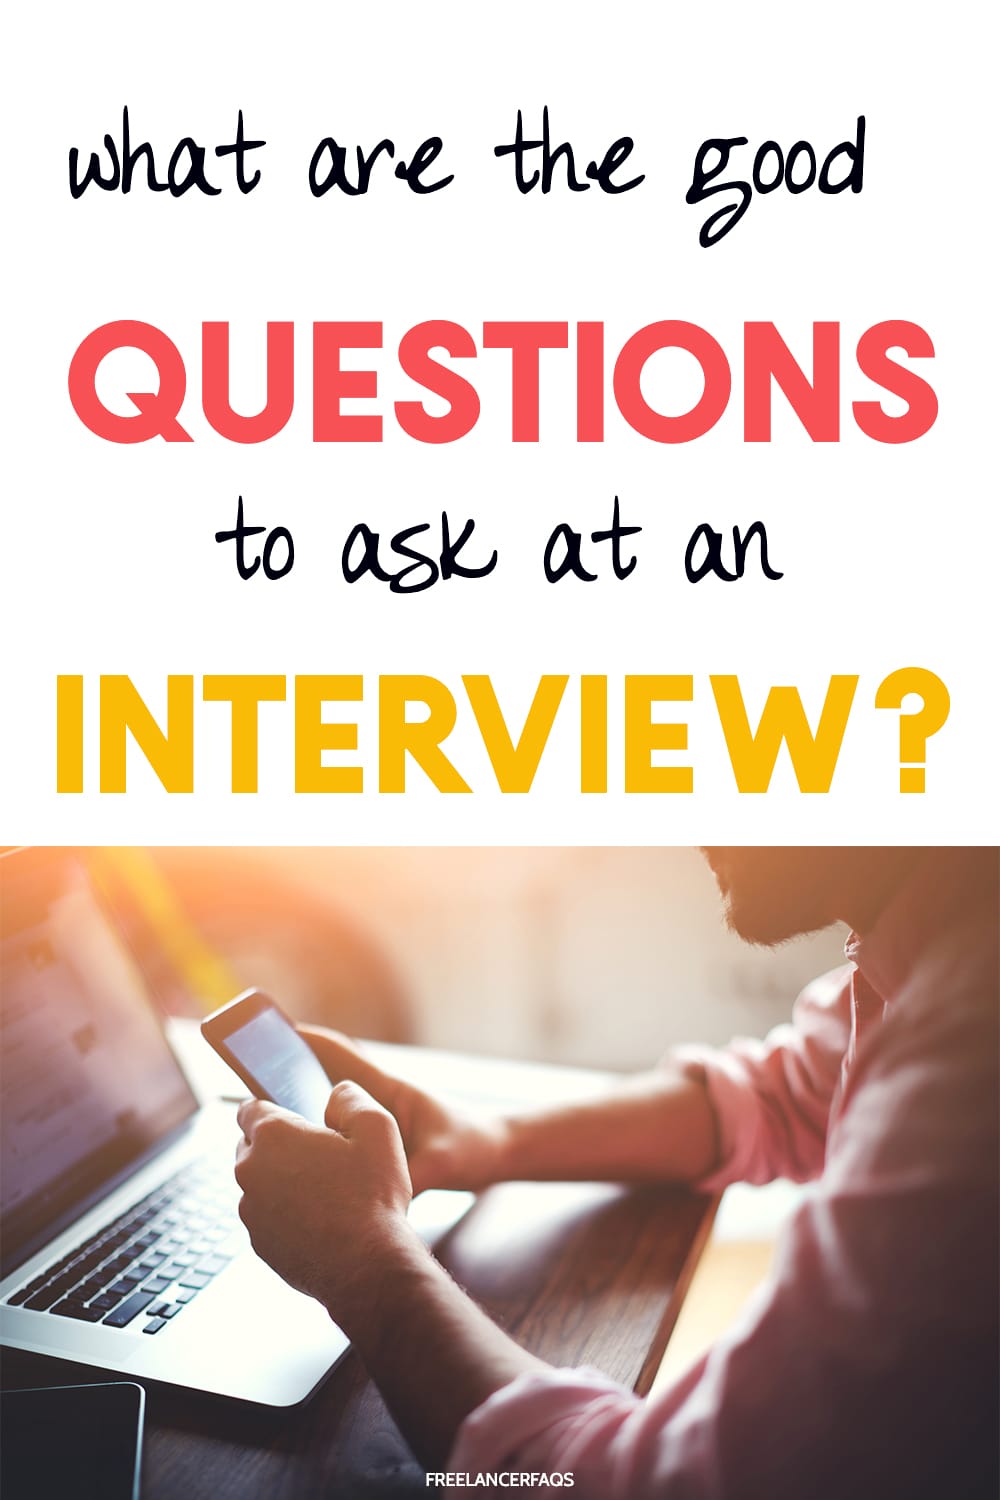 What Are Good Questions to Ask at an Interview? - Freelancer FAQs